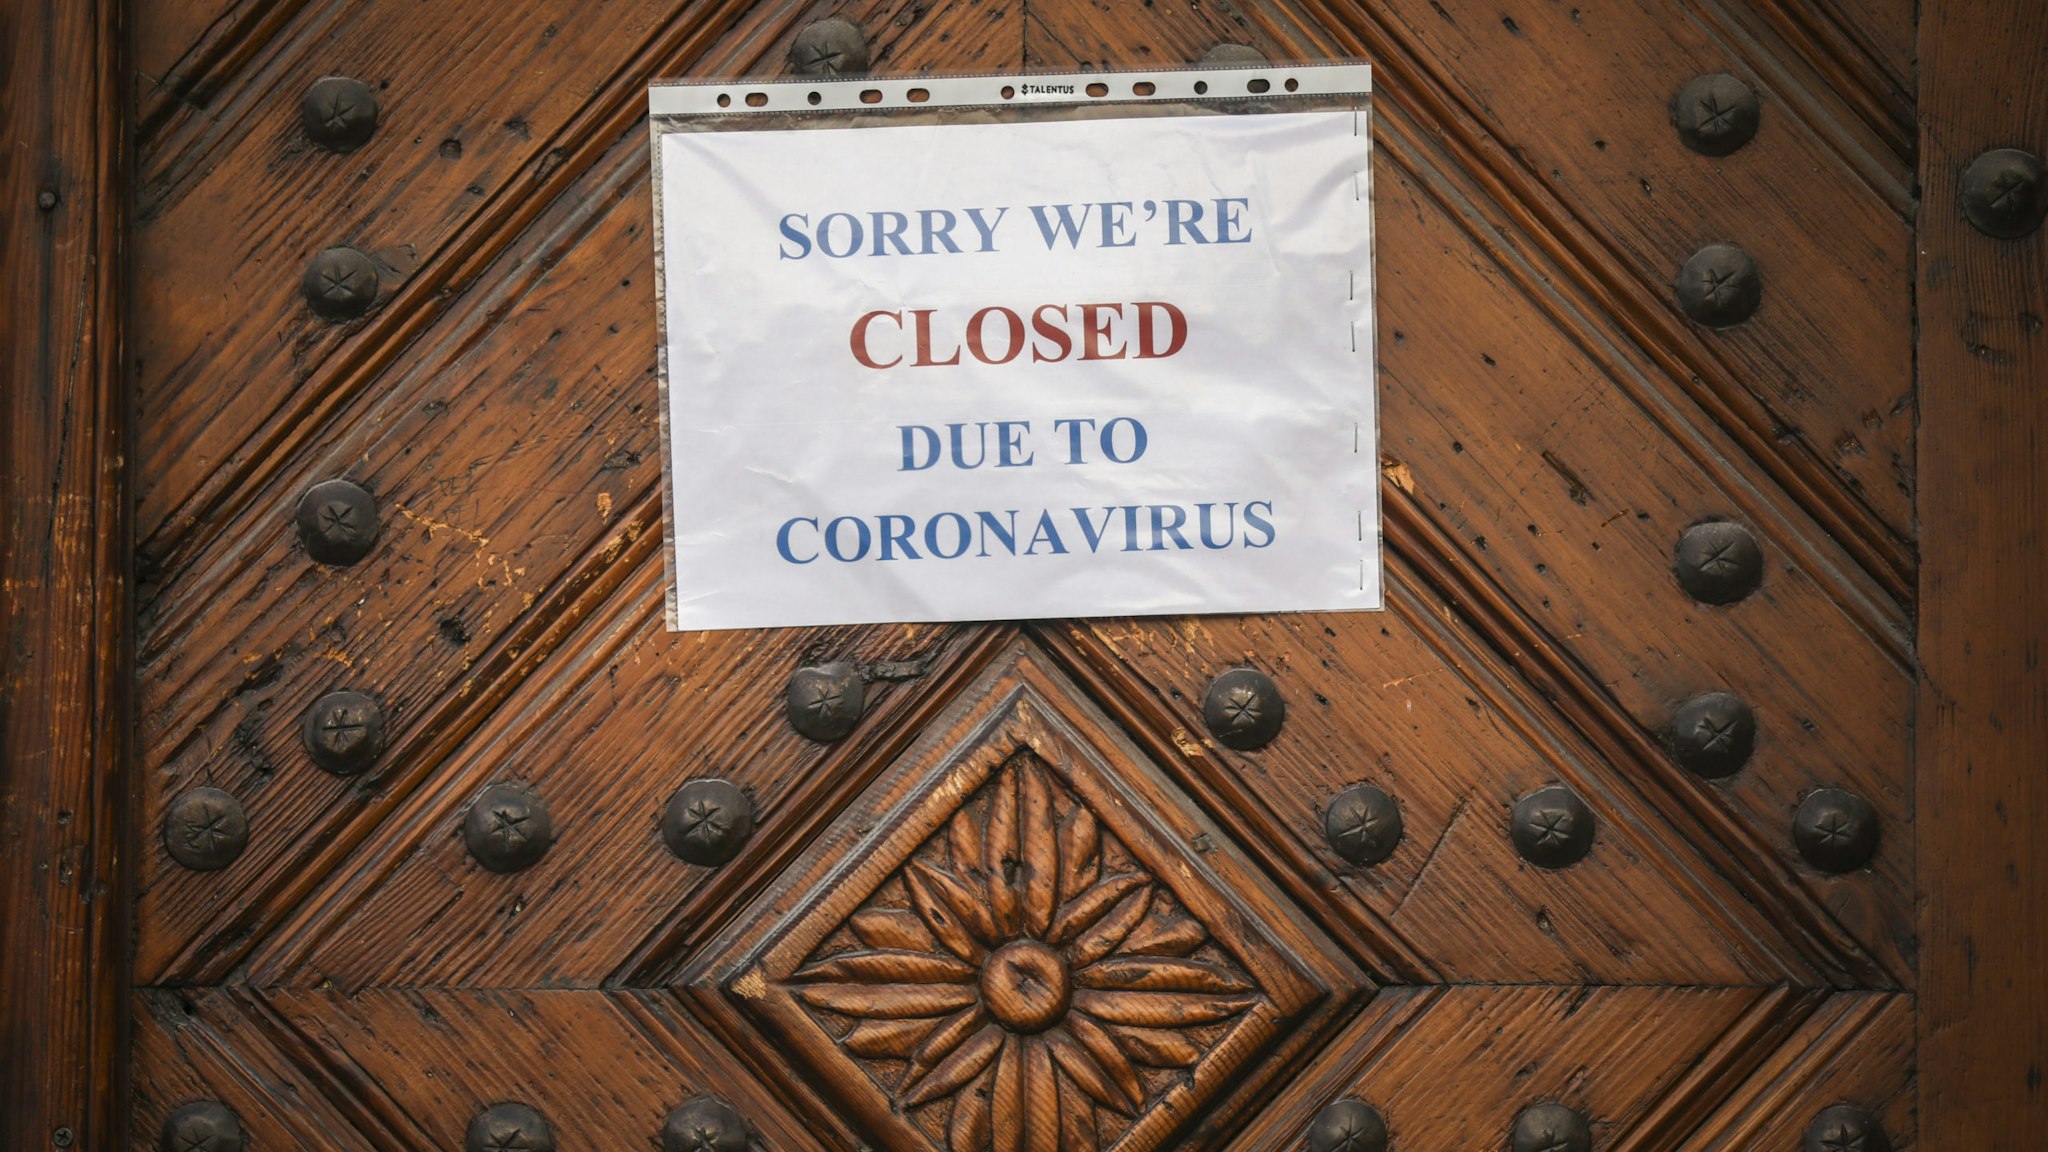 A restaurant is closed due to the spread of the coronavirus. Krakow, Poland on March 25, 2020. Polands government introduced new limitations across the country, such as rules preventing leaving home unless justified. (Photo by Beata Zawrzel/NurPhoto via Getty Images)